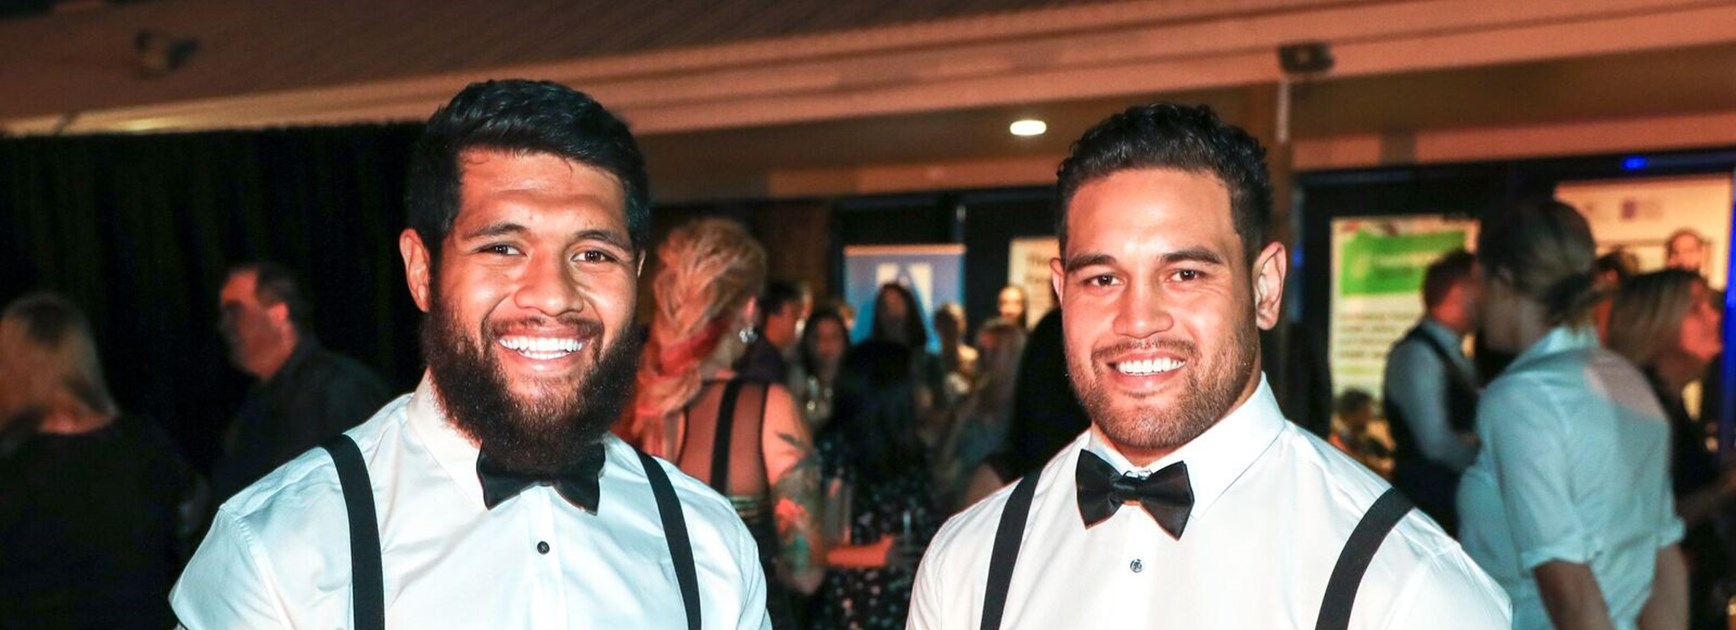 Players impress at Cowboys Night for a Cause